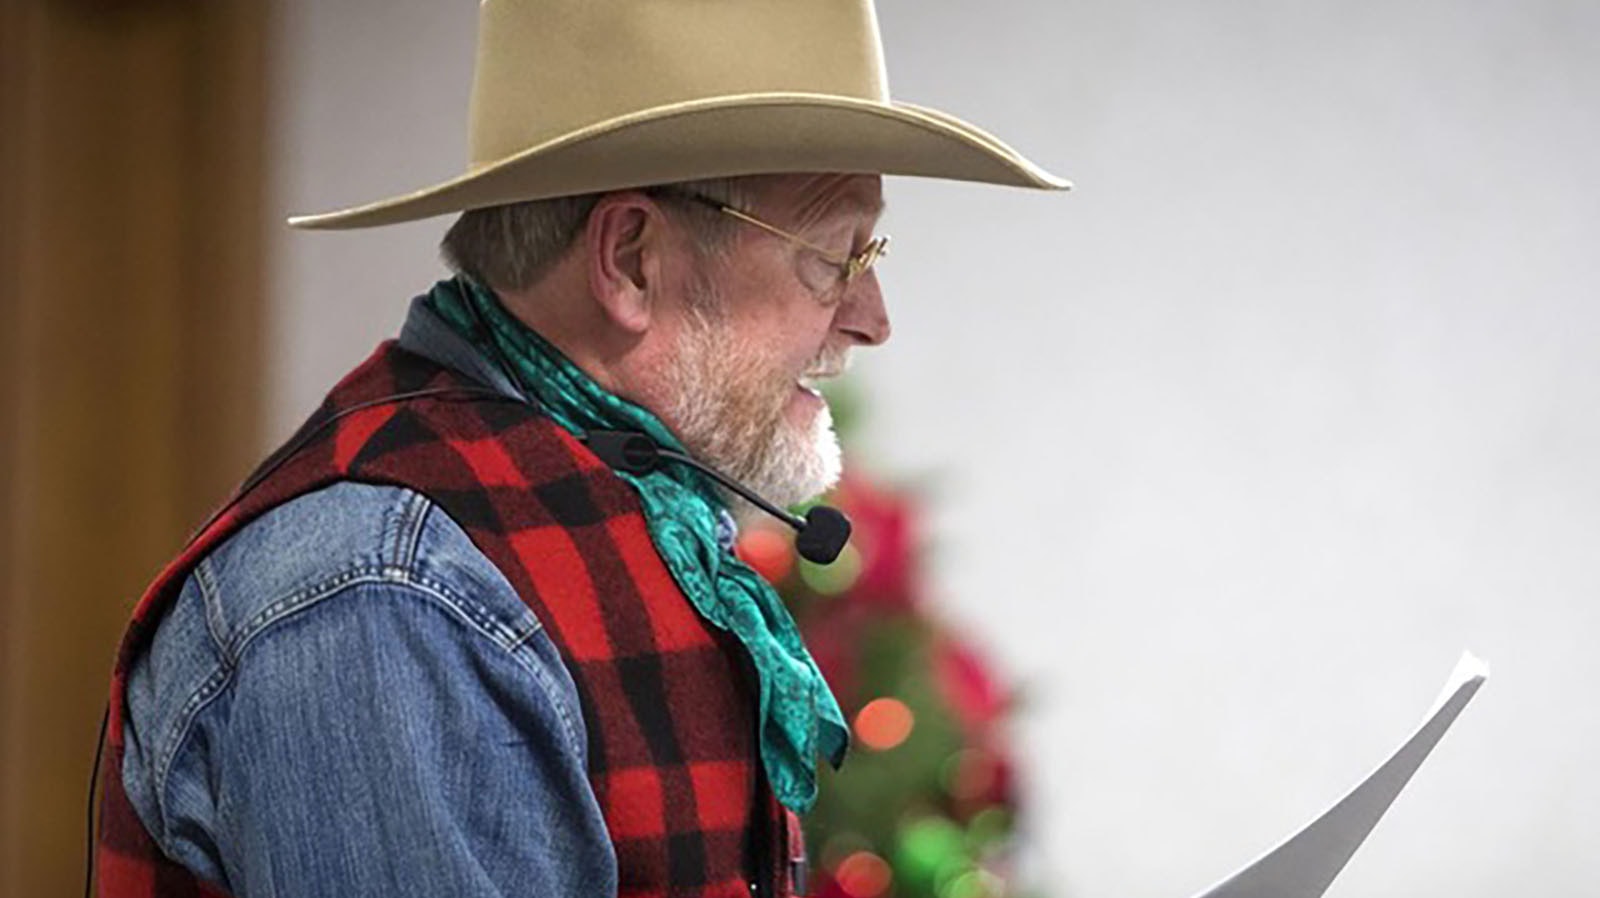 Author Craig Johnson began his annual Christmas stories 20 years ago as a gift for his fans.